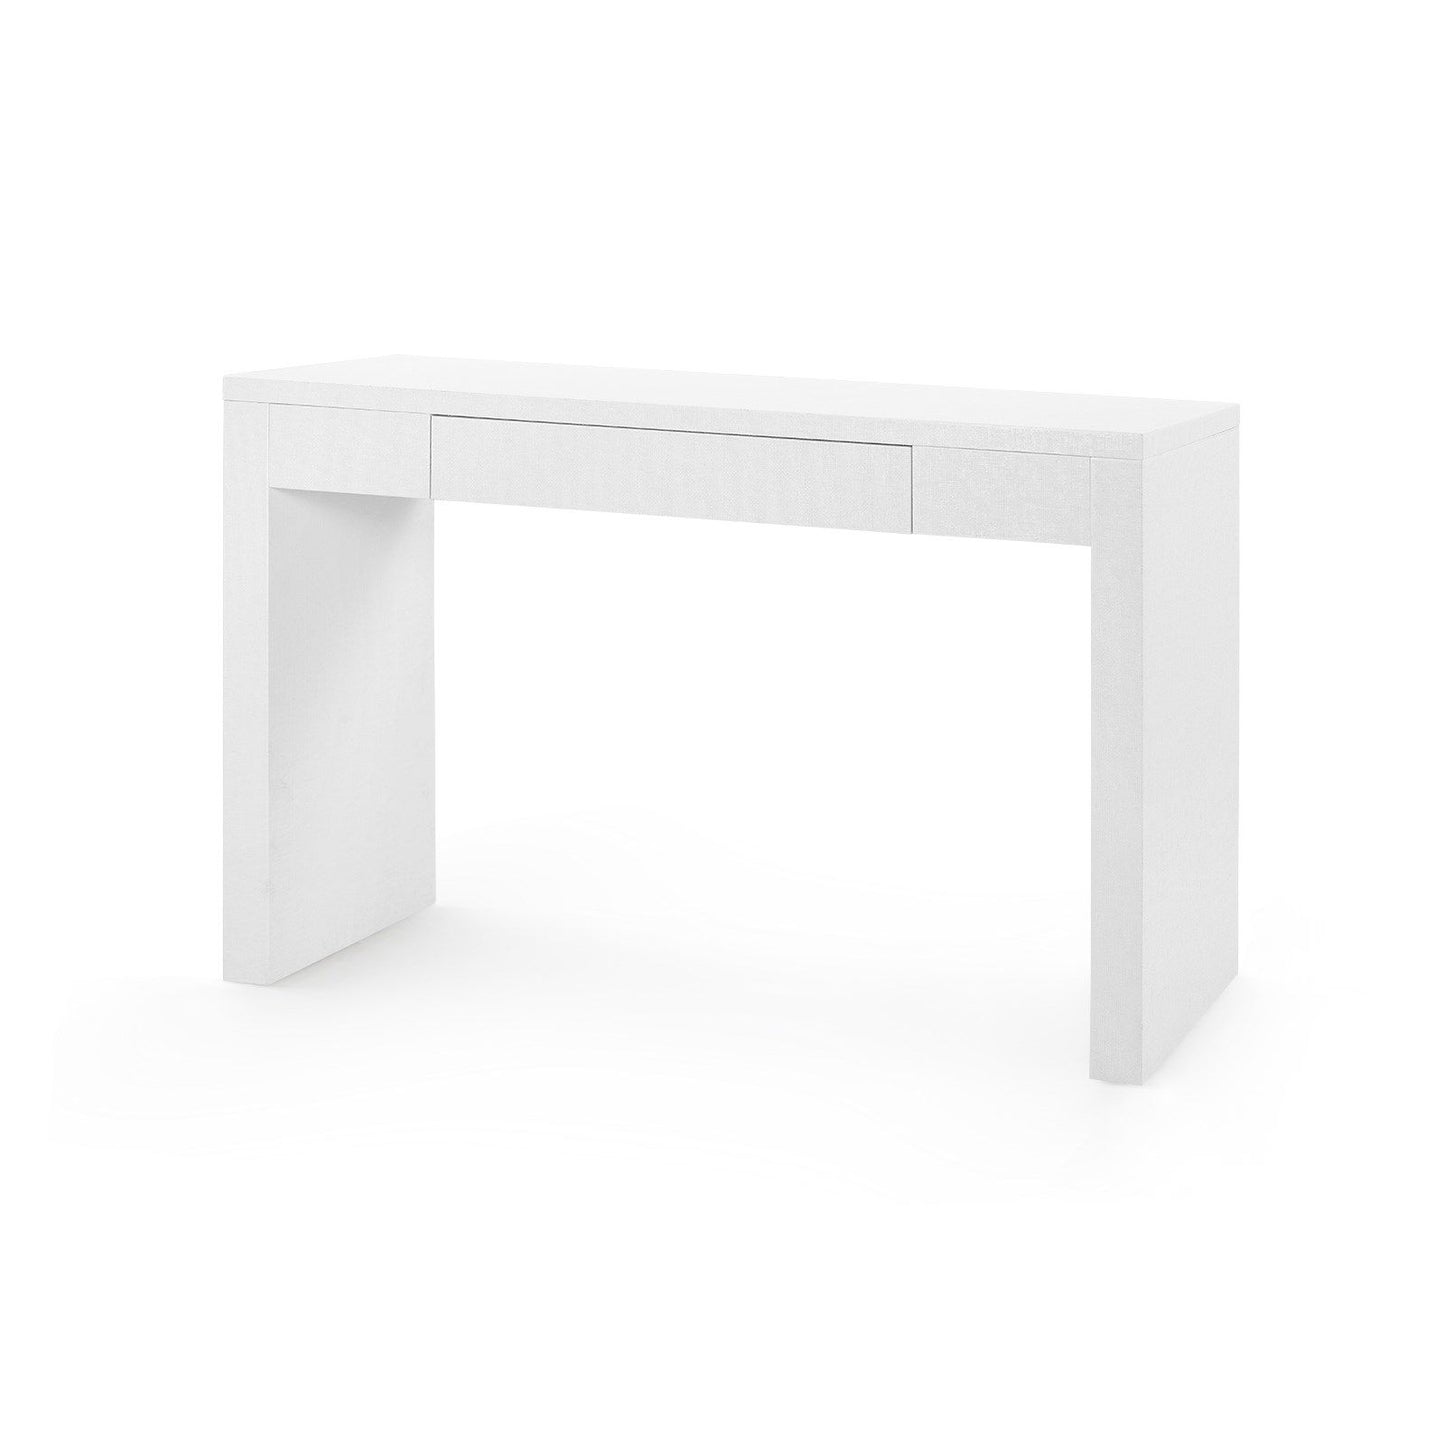 Load image into Gallery viewer, Morgan Console Table WhiteTable Bungalow 5  White   Four Hands, Burke Decor, Mid Century Modern Furniture, Old Bones Furniture Company, Old Bones Co, Modern Mid Century, Designer Furniture, https://www.oldbonesco.com/
